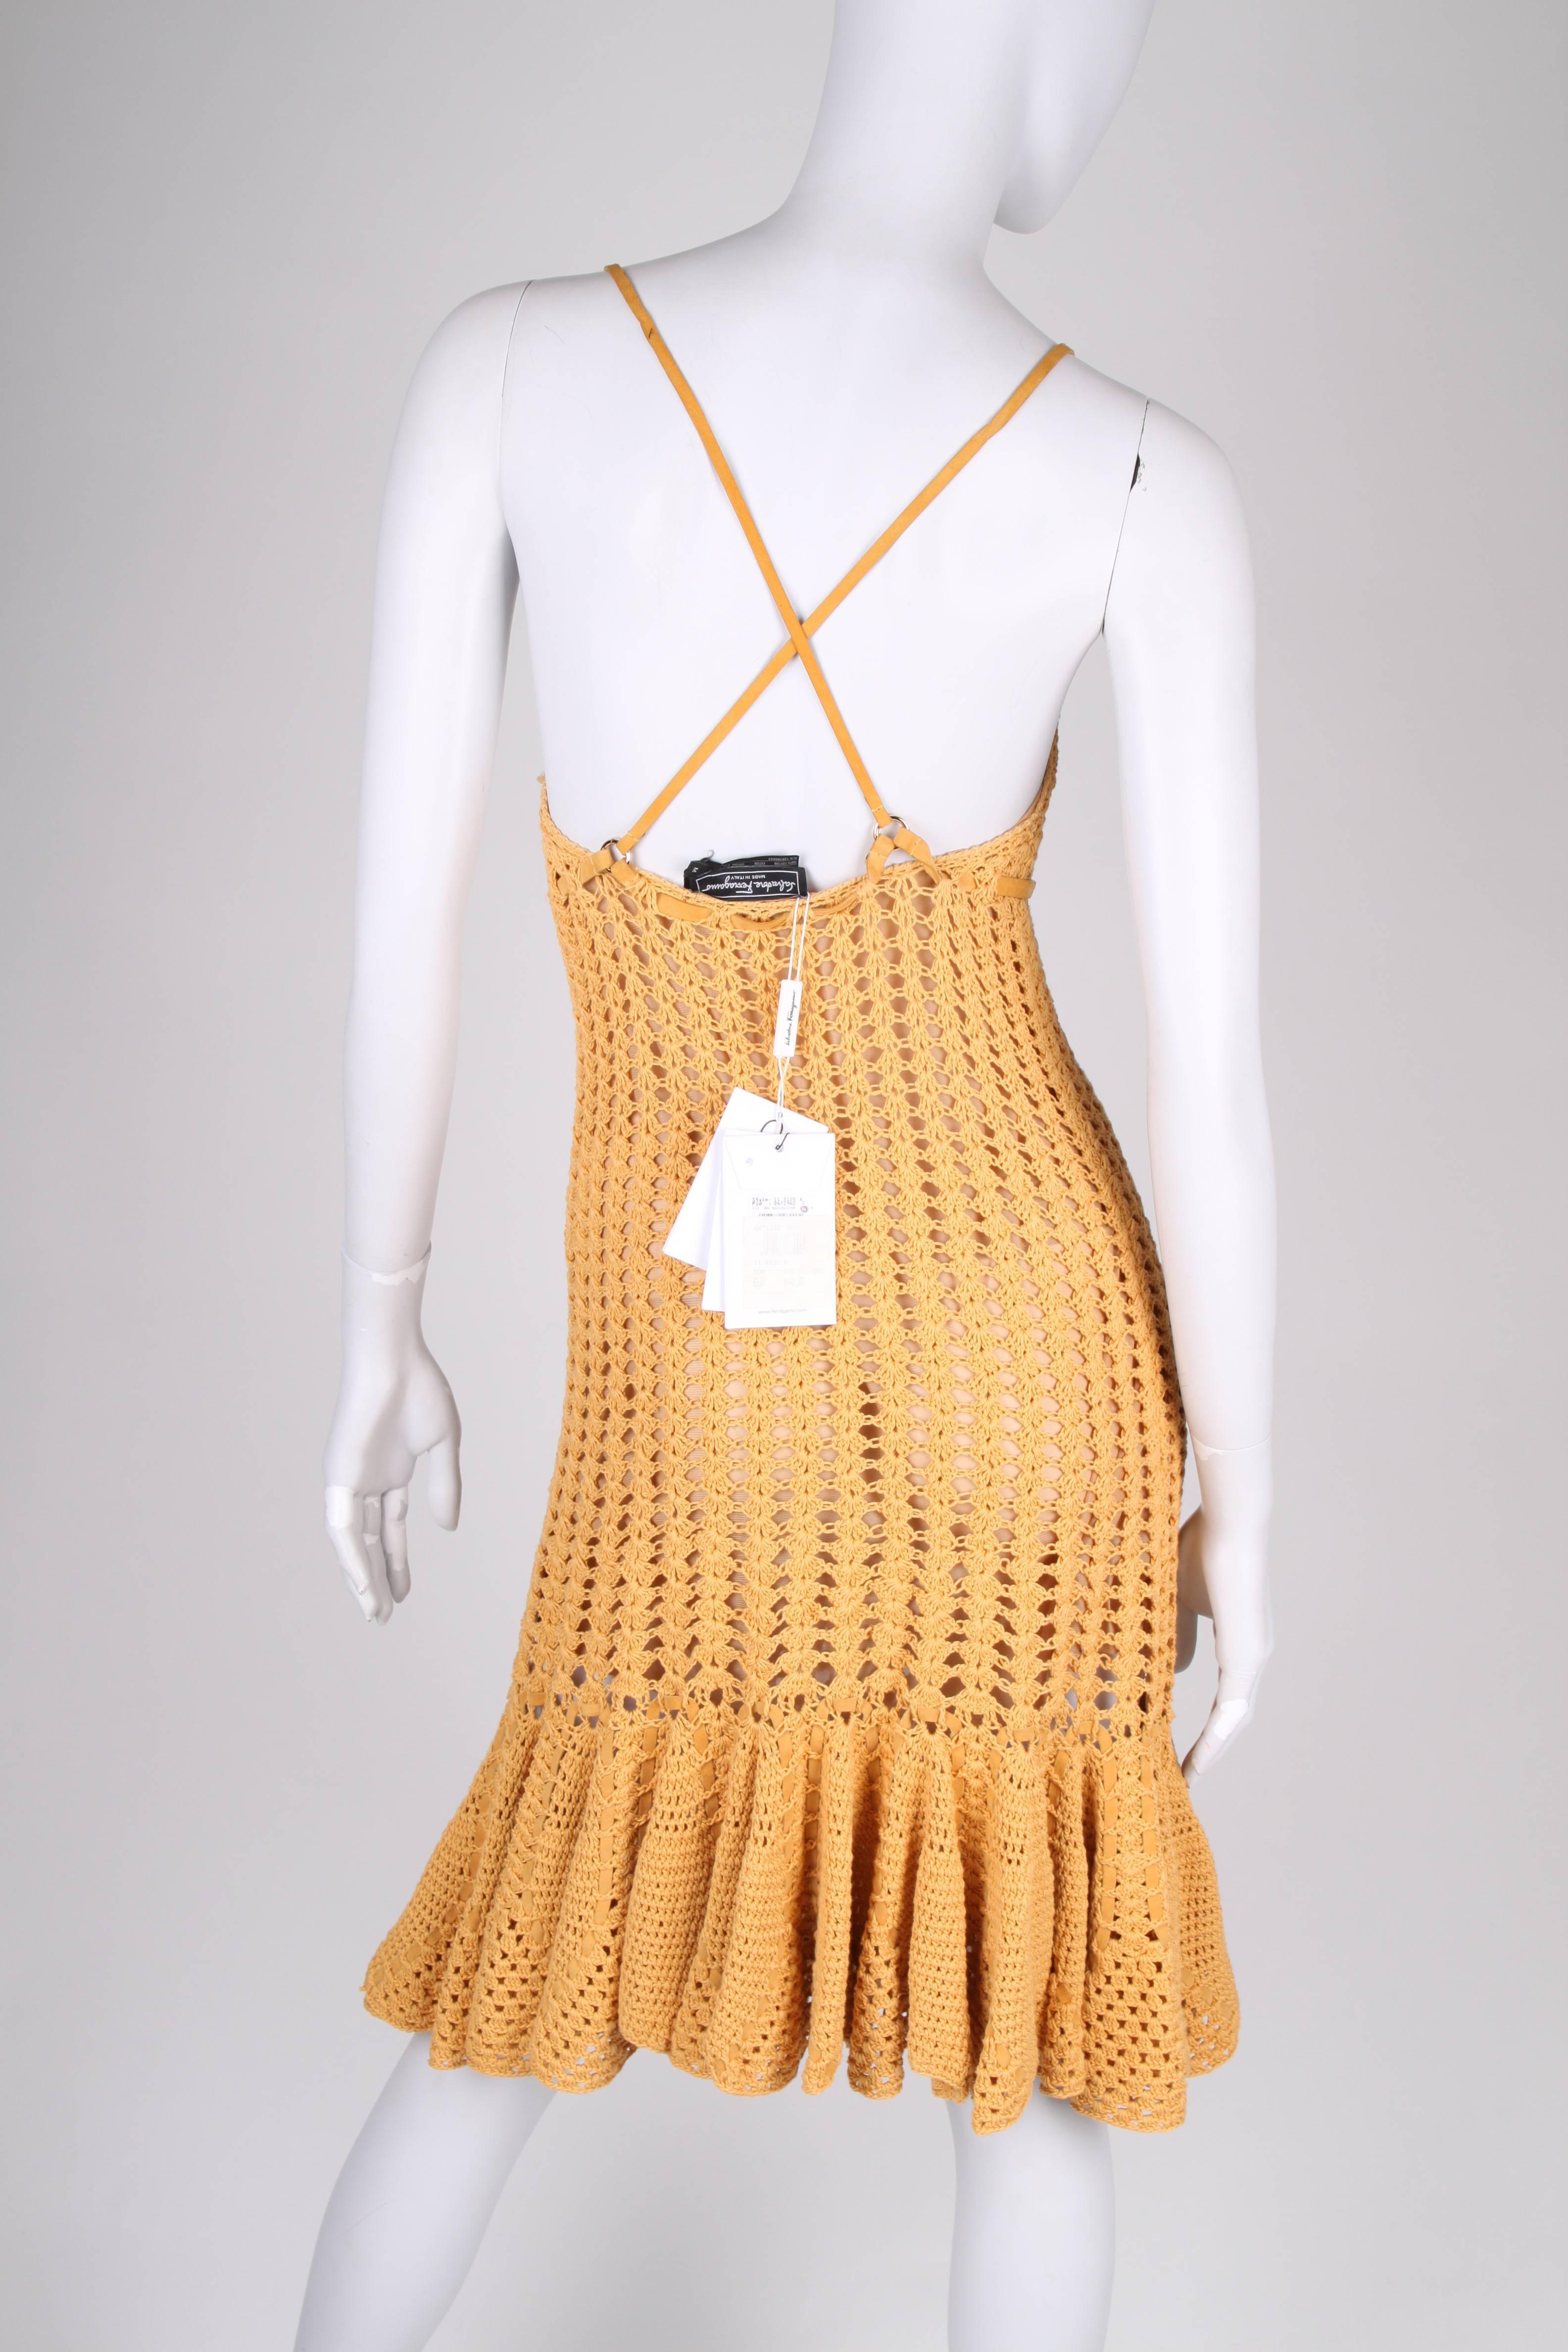 Fancy dress by Salvatore Ferragamo with leather detailing in a warm mustard yellow color.

The dress has narrow leather shoulder straps, a leather waist belt and is fully lined with skintone fabric. The knitted material is stretching, so there is no